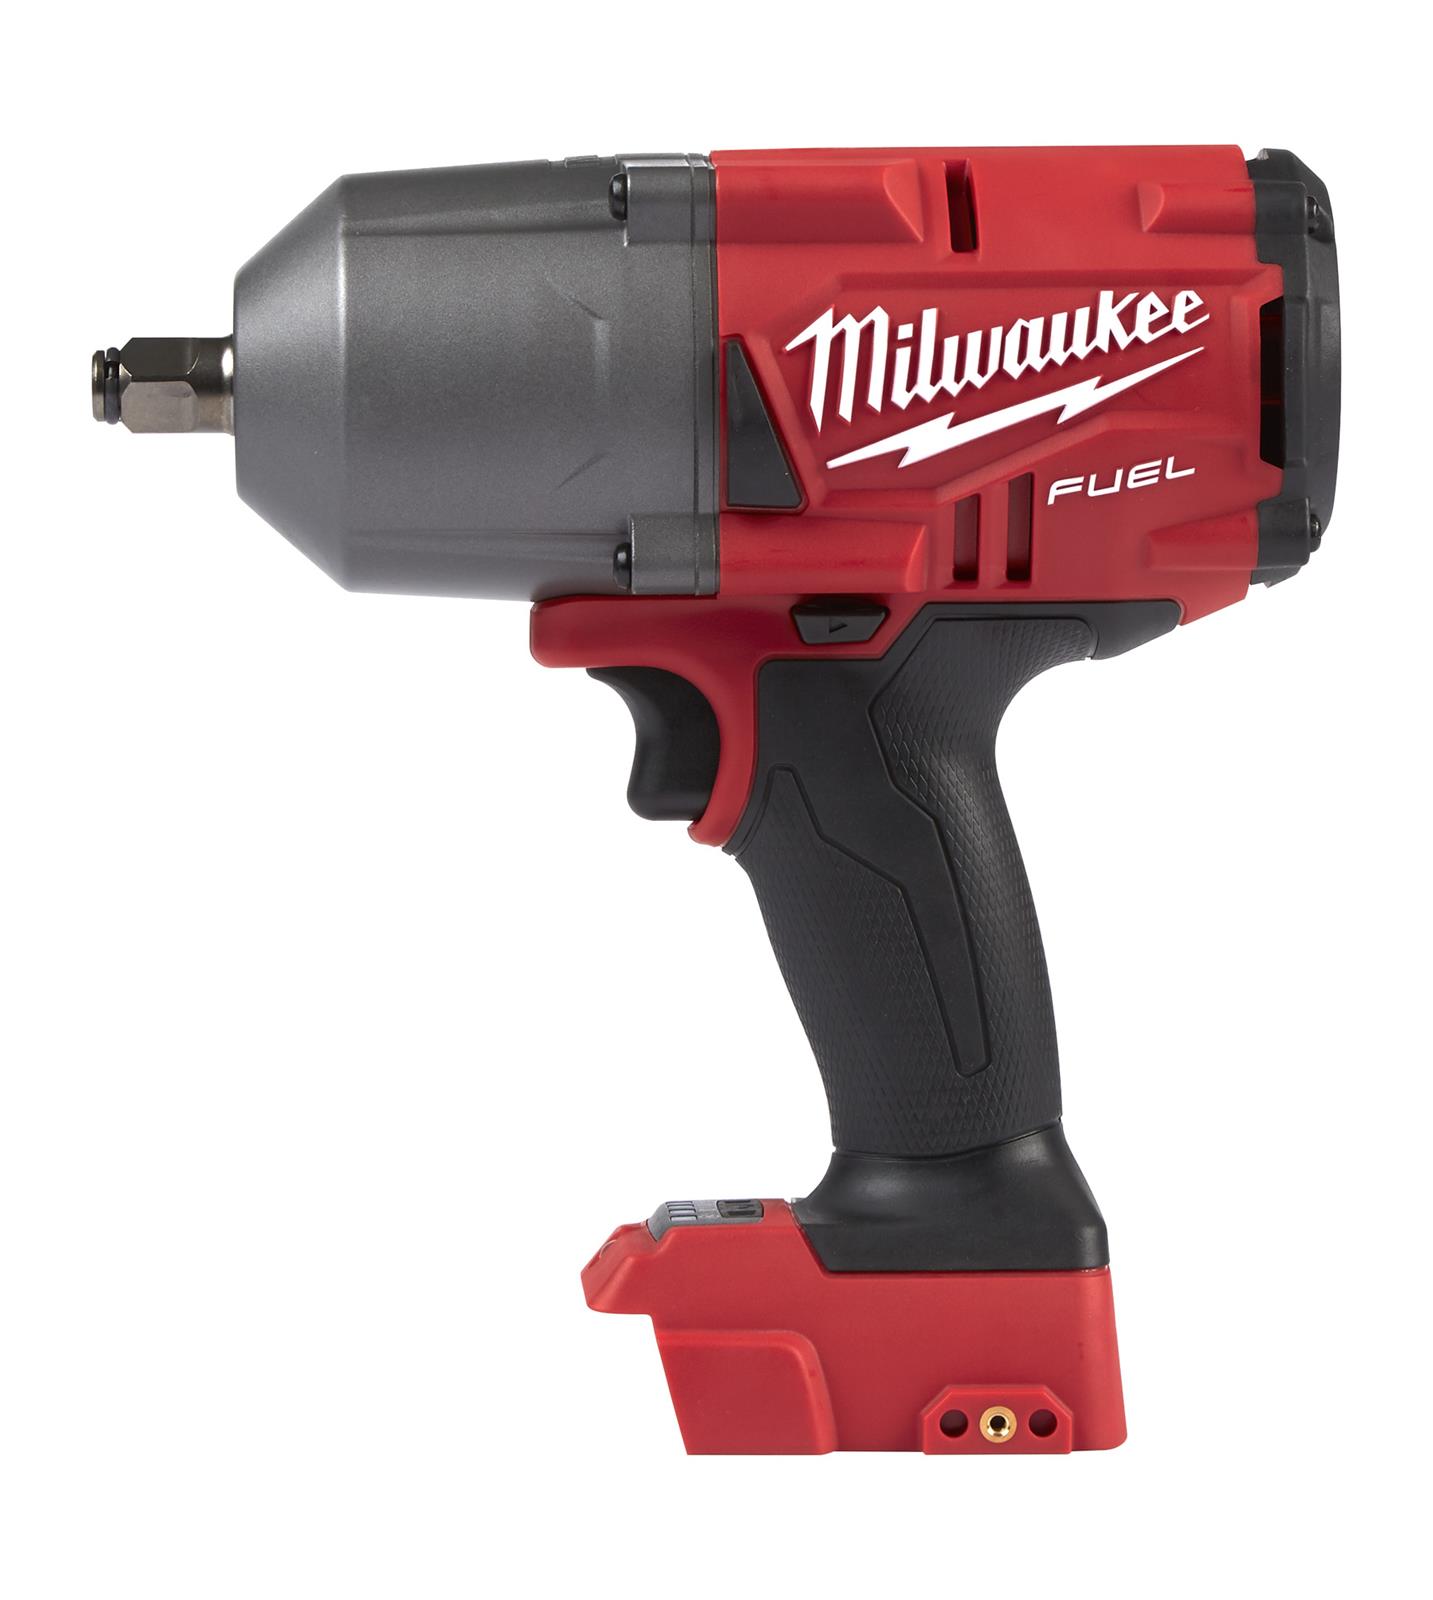 Home Depot Clearance Sale Special Tool Deals on Milwaukee Tools